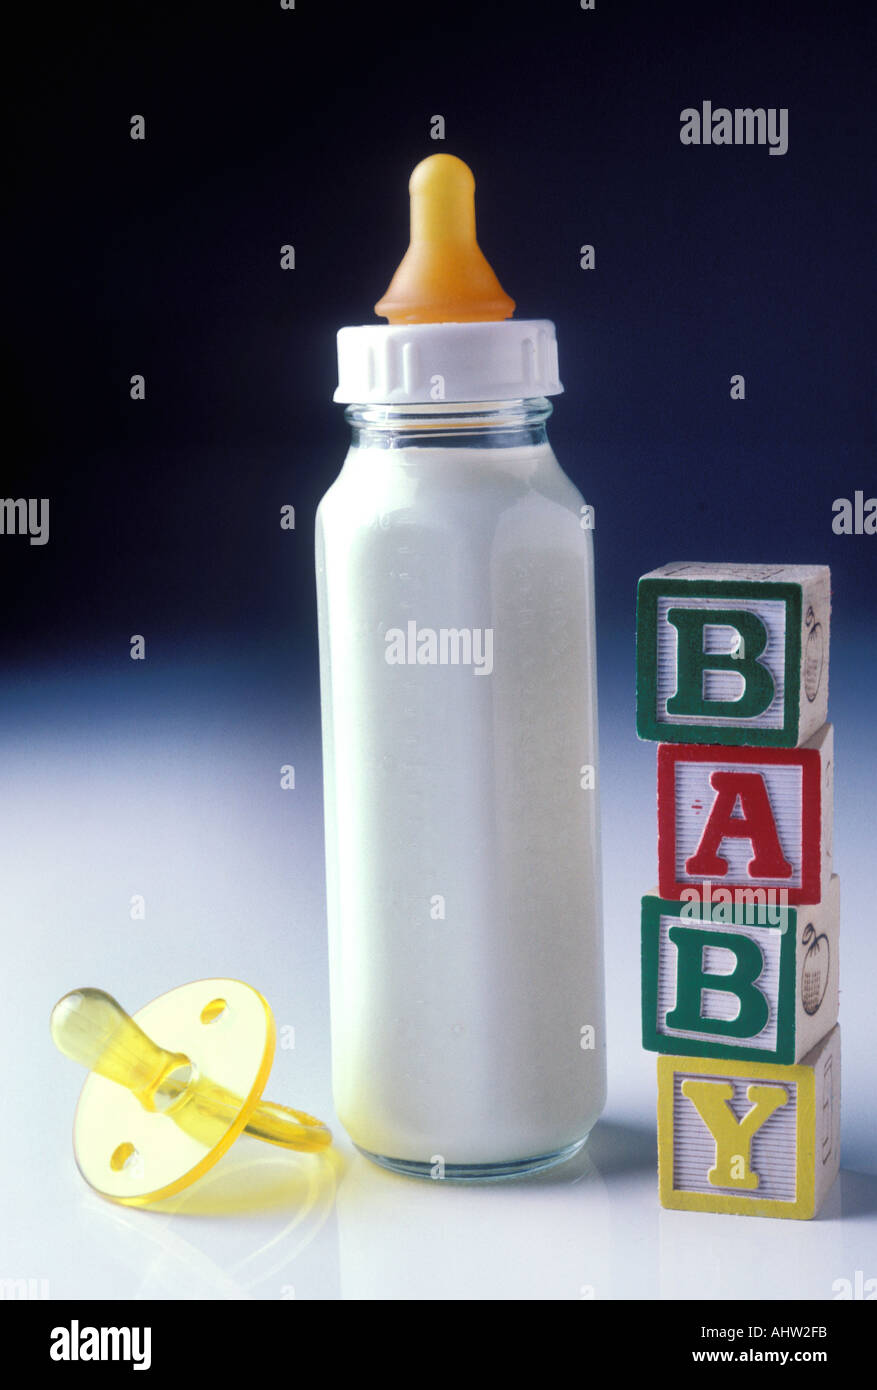 https://c8.alamy.com/comp/AHW2FB/a-bottle-of-baby-s-milk-bottle-with-toy-blocks-spelling-baby-AHW2FB.jpg